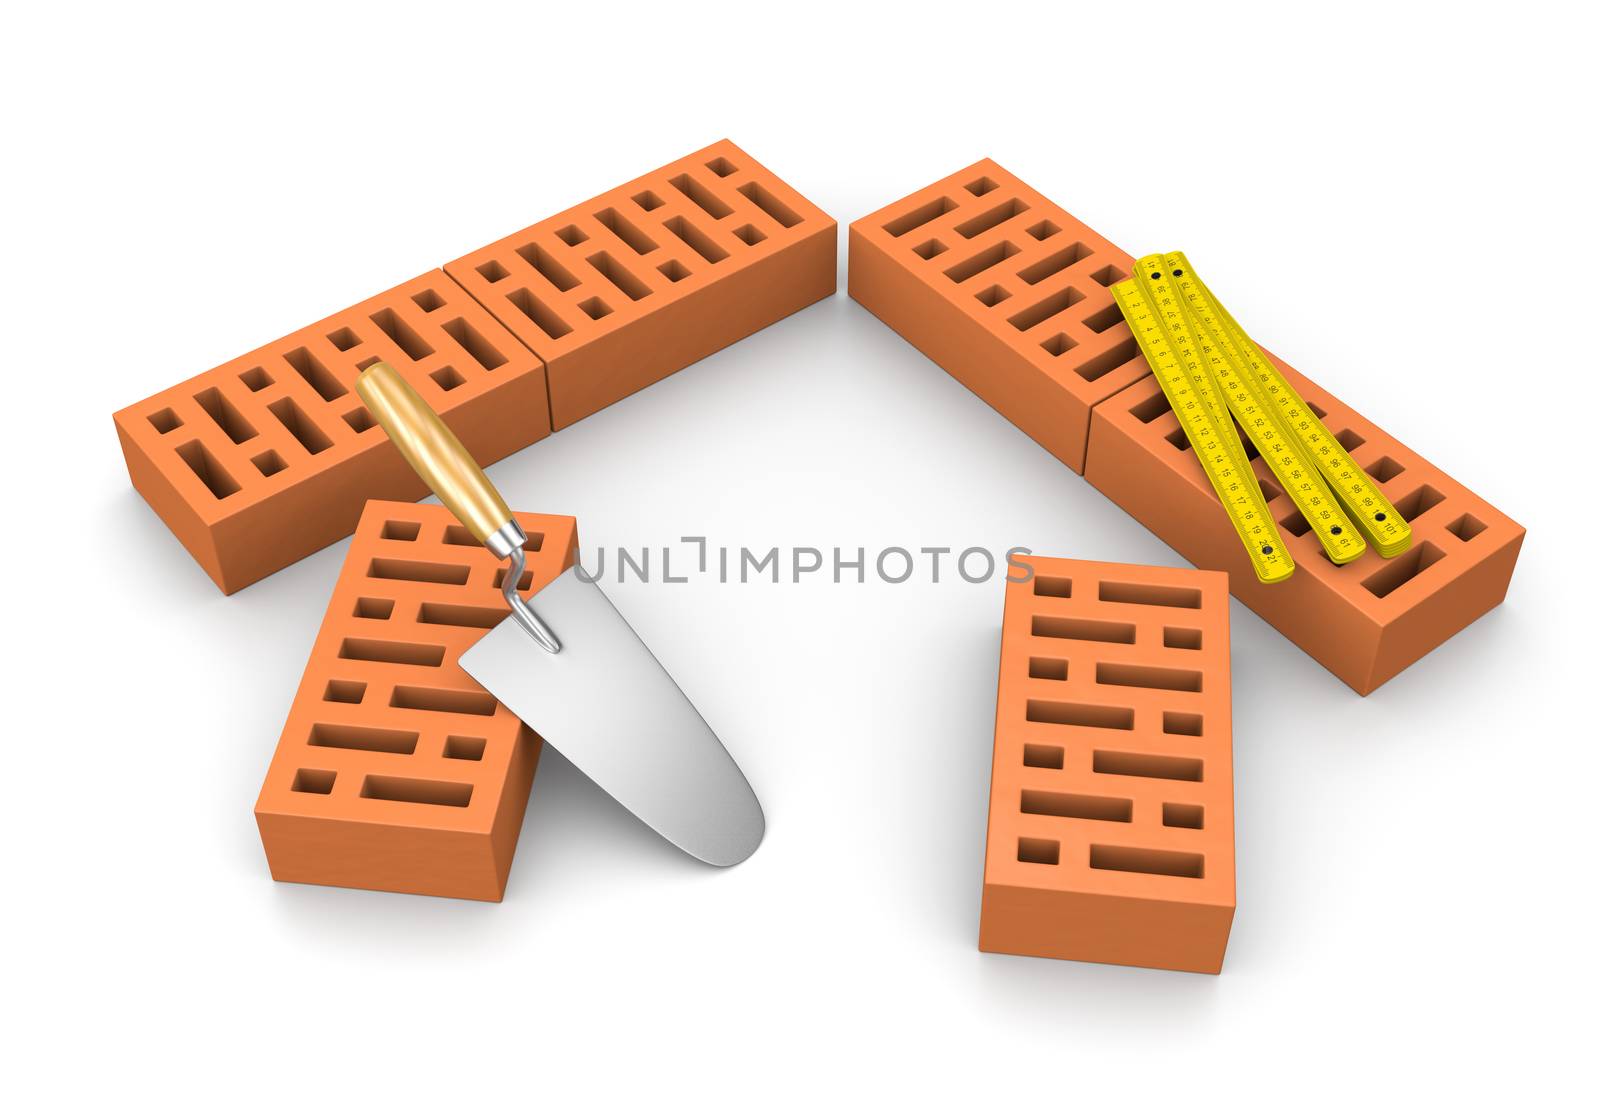 Carpenter's Meter and Trowel Leaned Against Bricks in the Shape of an House on White Background 3D Illustration